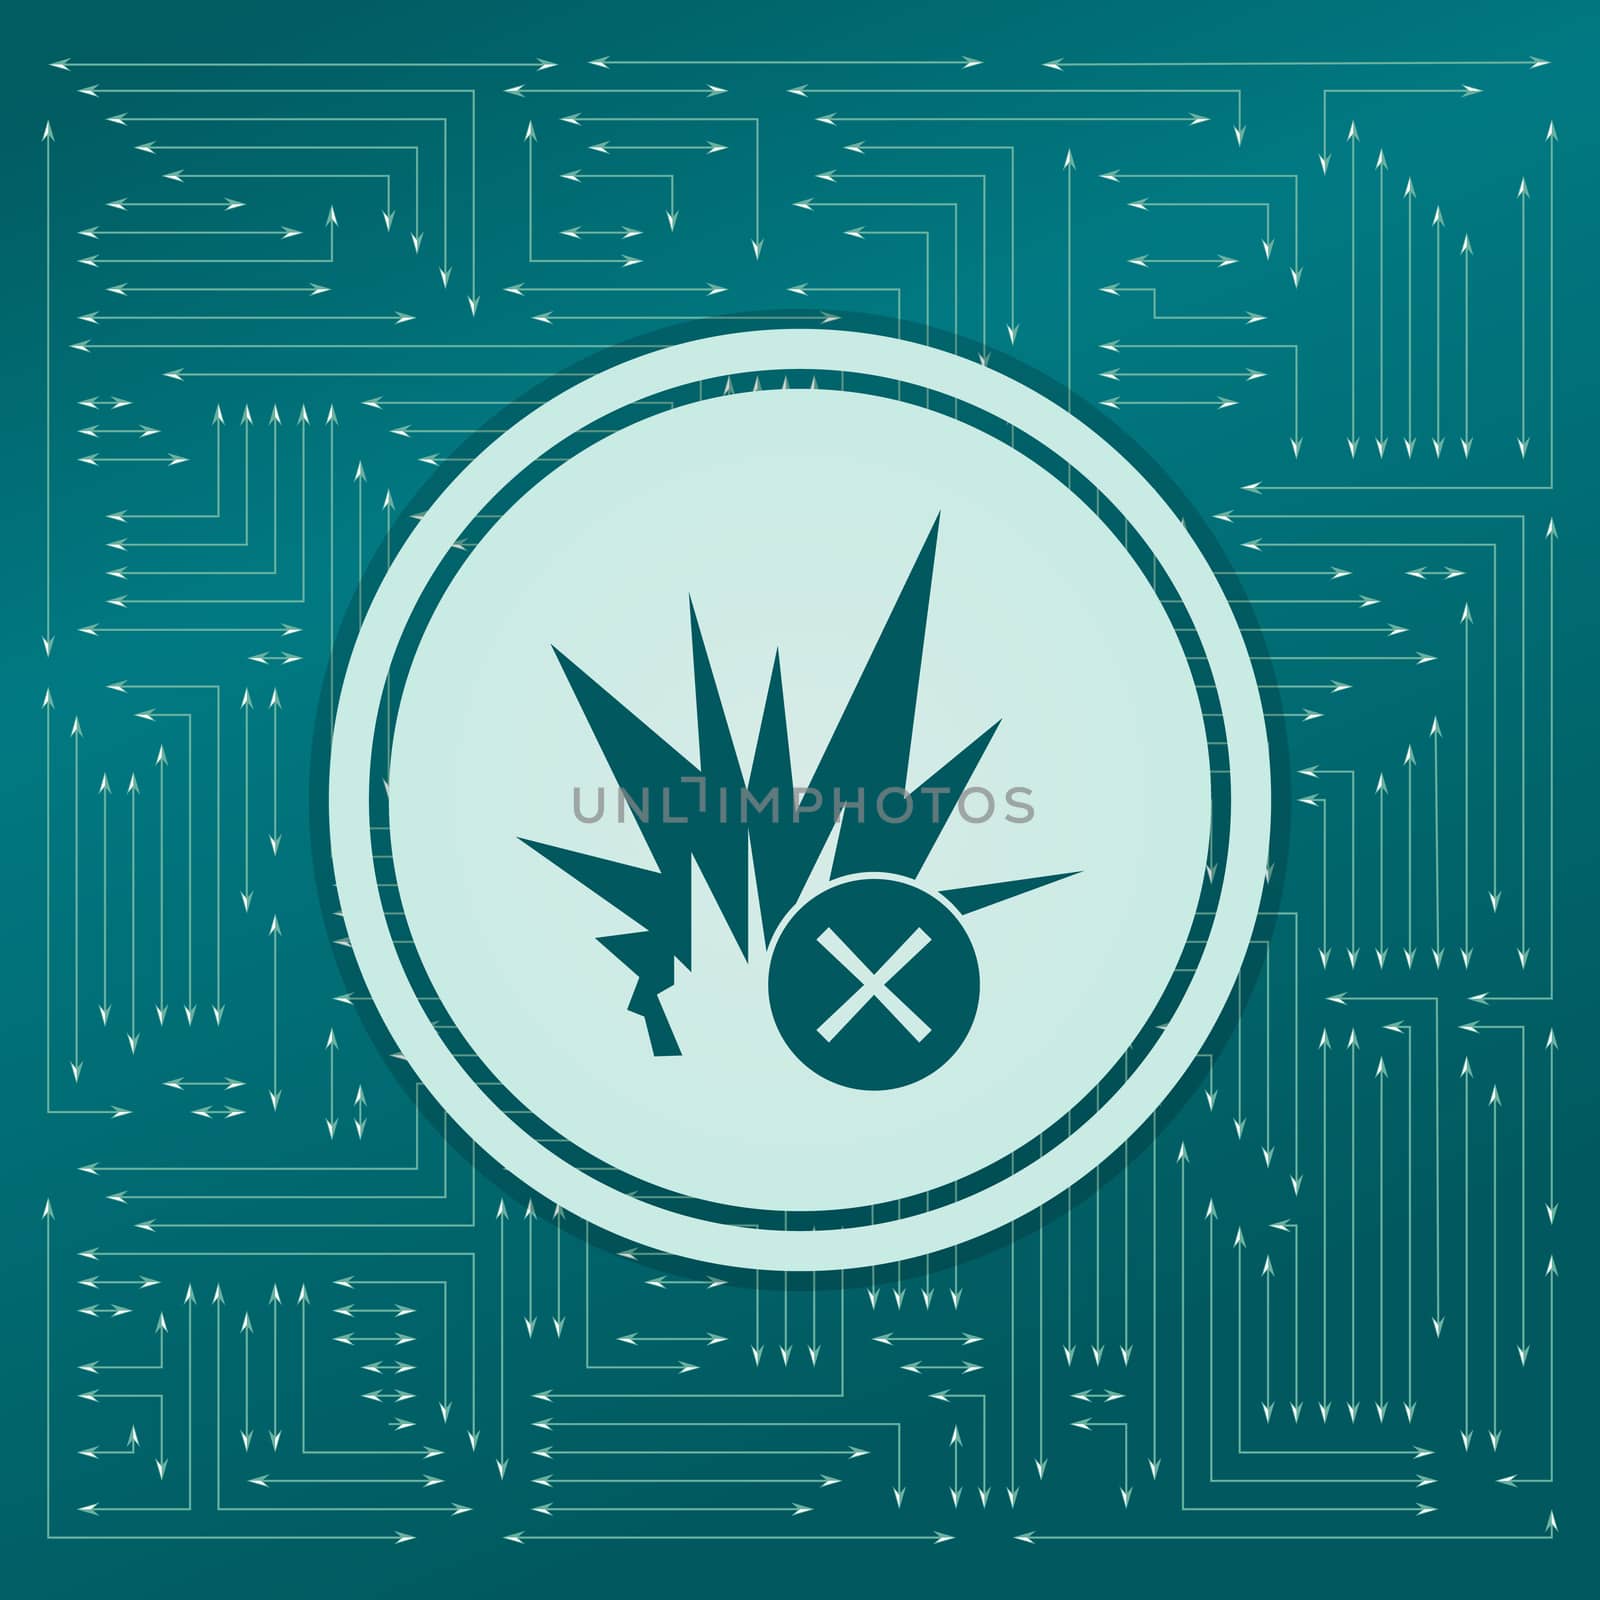 explosion icon on a green background, with arrows in different directions. It appears on the electronic board. illustration